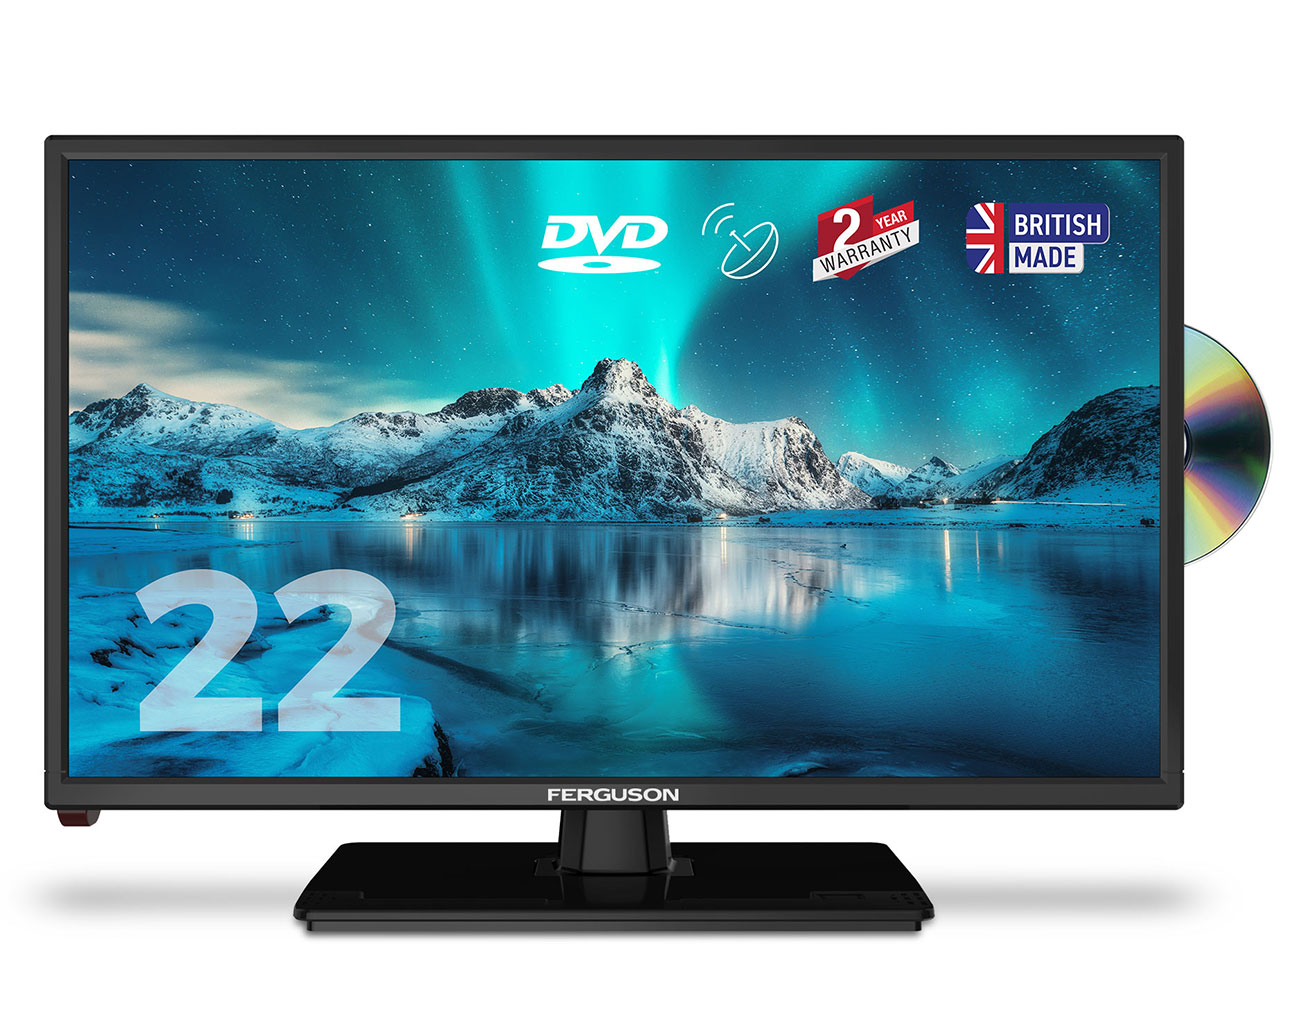 Huracán mosaico Articulación 22" Full HD Widescreen LED TV with Built-in DVD Player - Ferguson  Televisions | HD LED TV